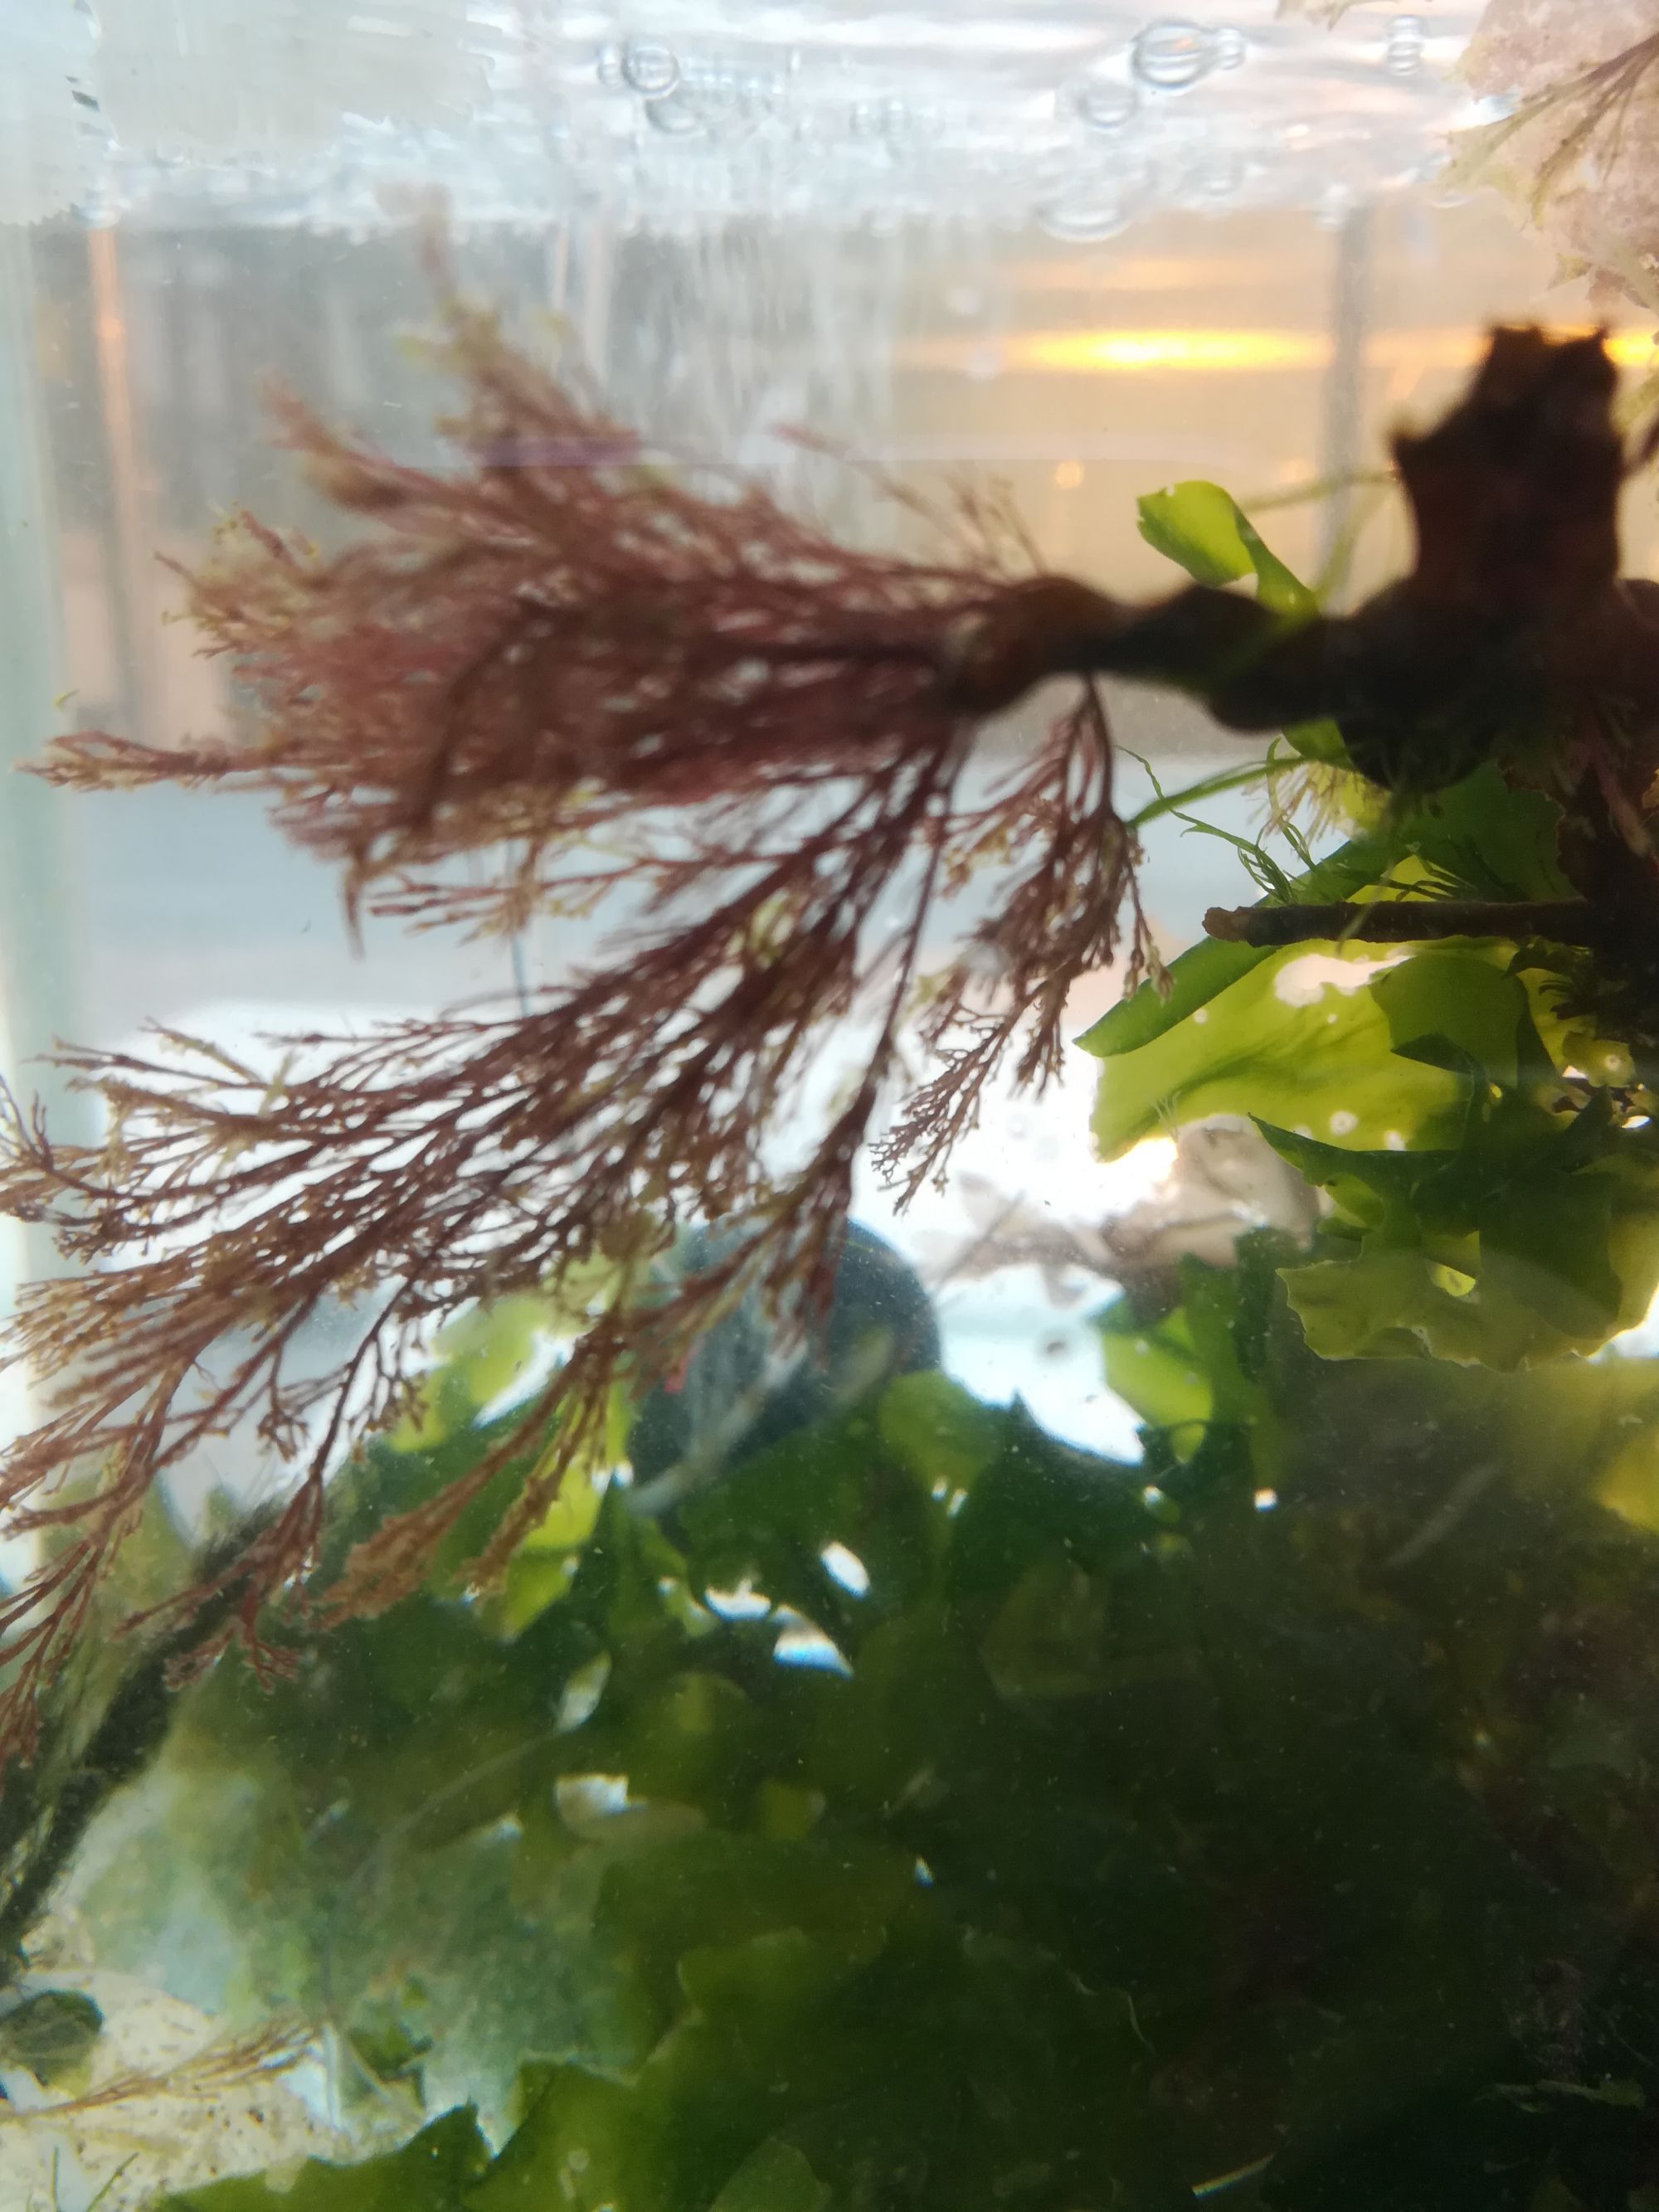 Picture detail from an aquarium with red algae, brown algae and green algae. On the top you can see some air bubbles reaching the water surface.